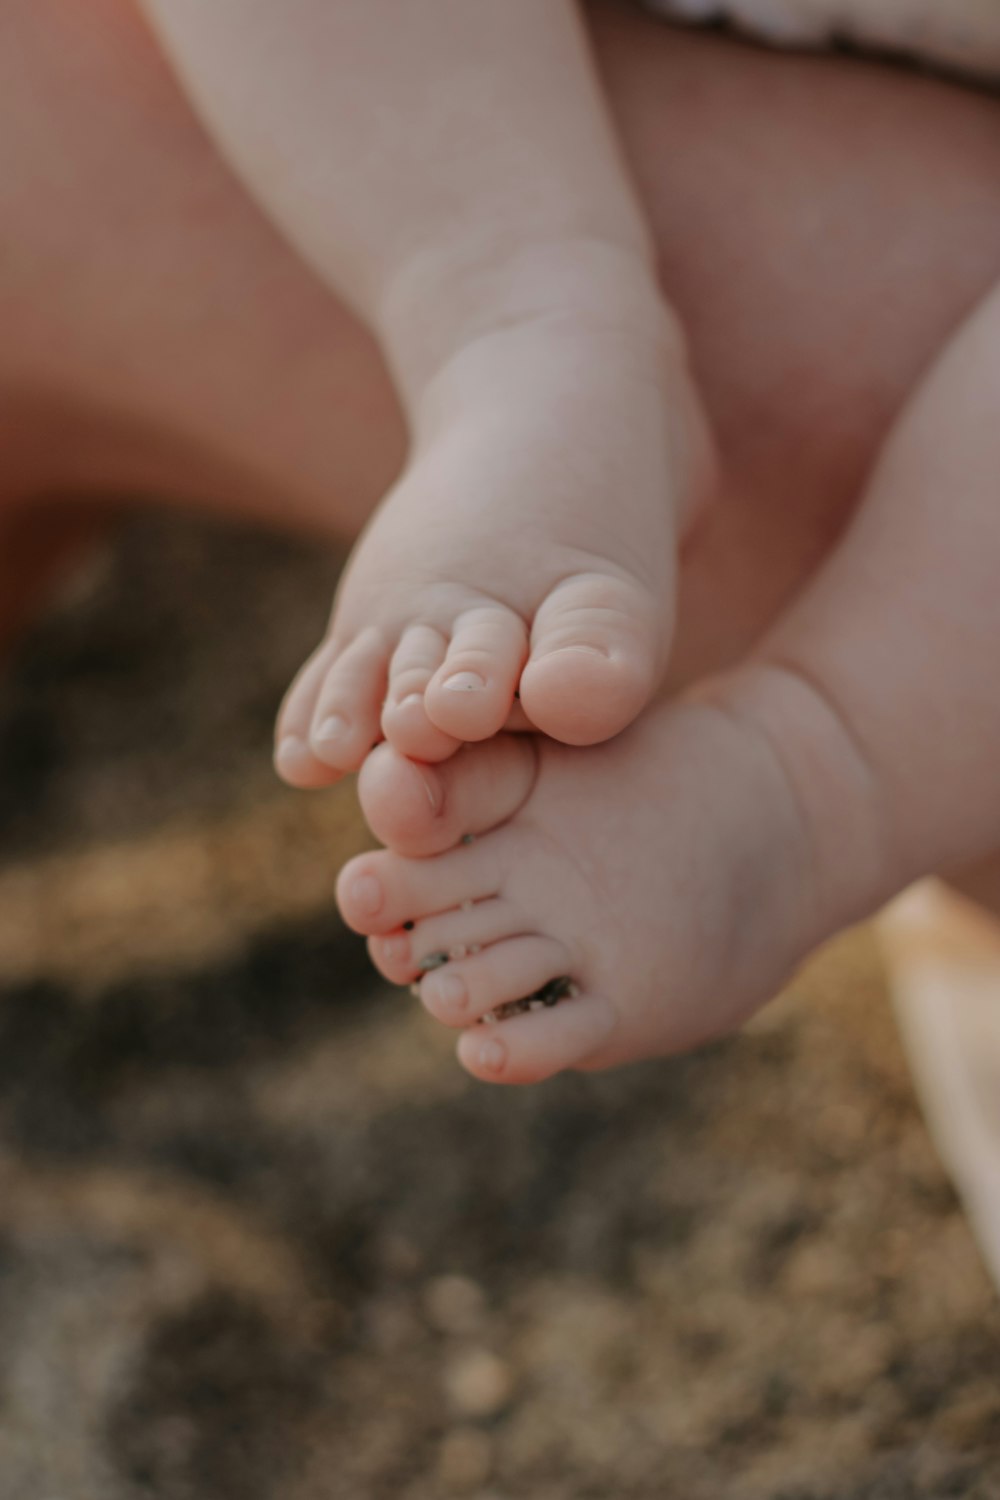 a close up of a person holding a baby's hand